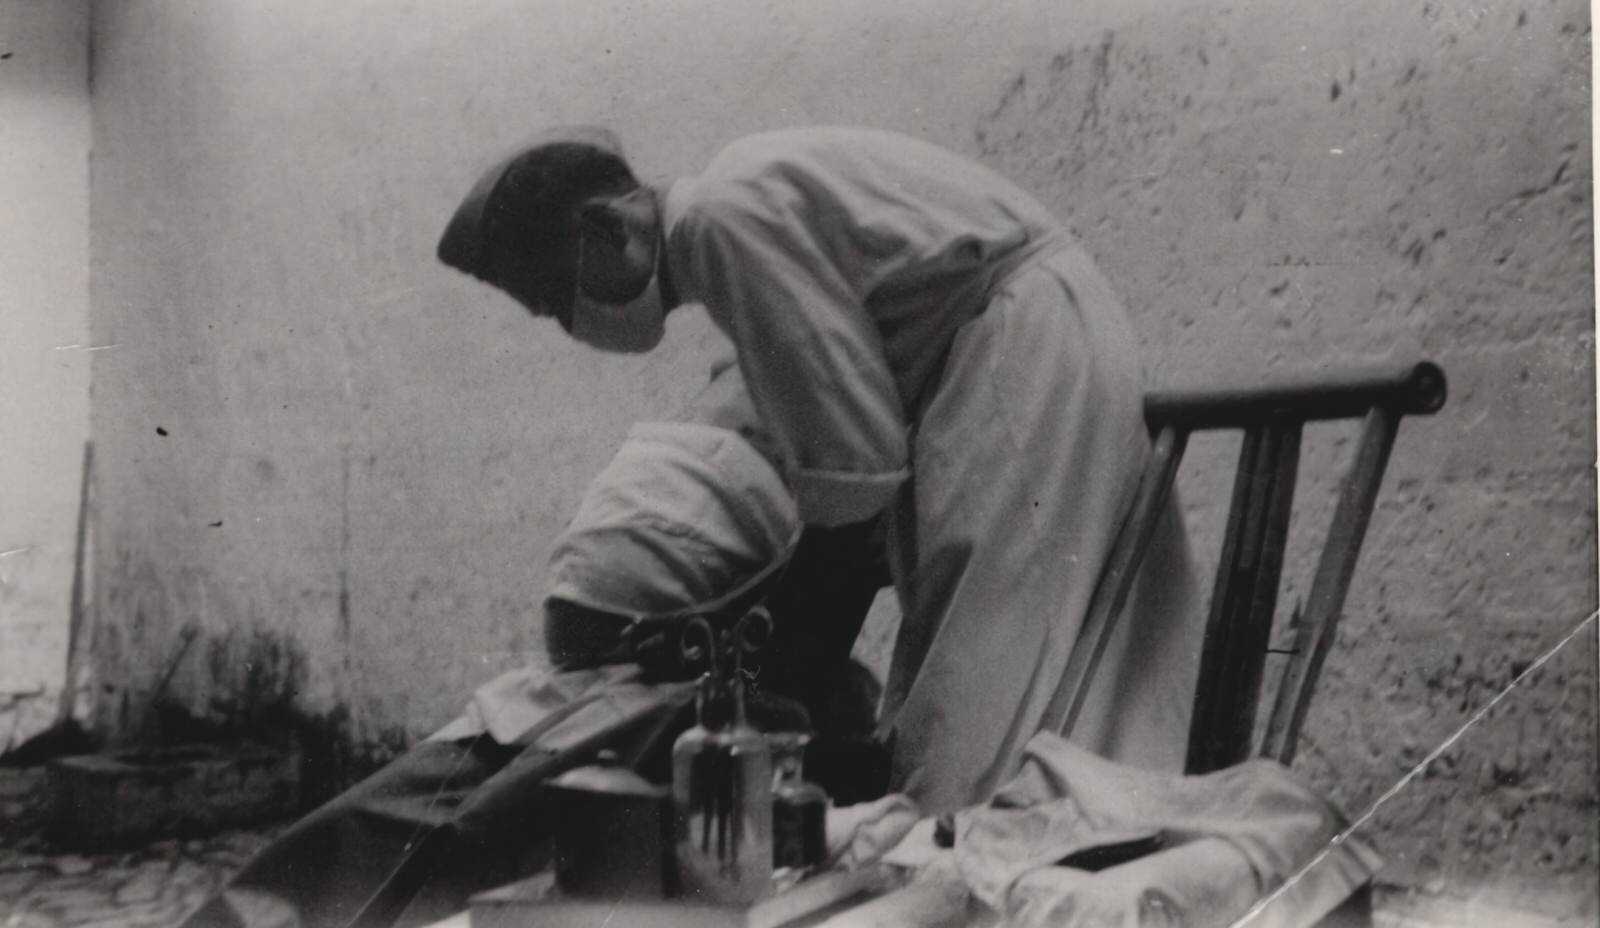 A KMT military medical officer having a surgery for the wounded. 1937-1940